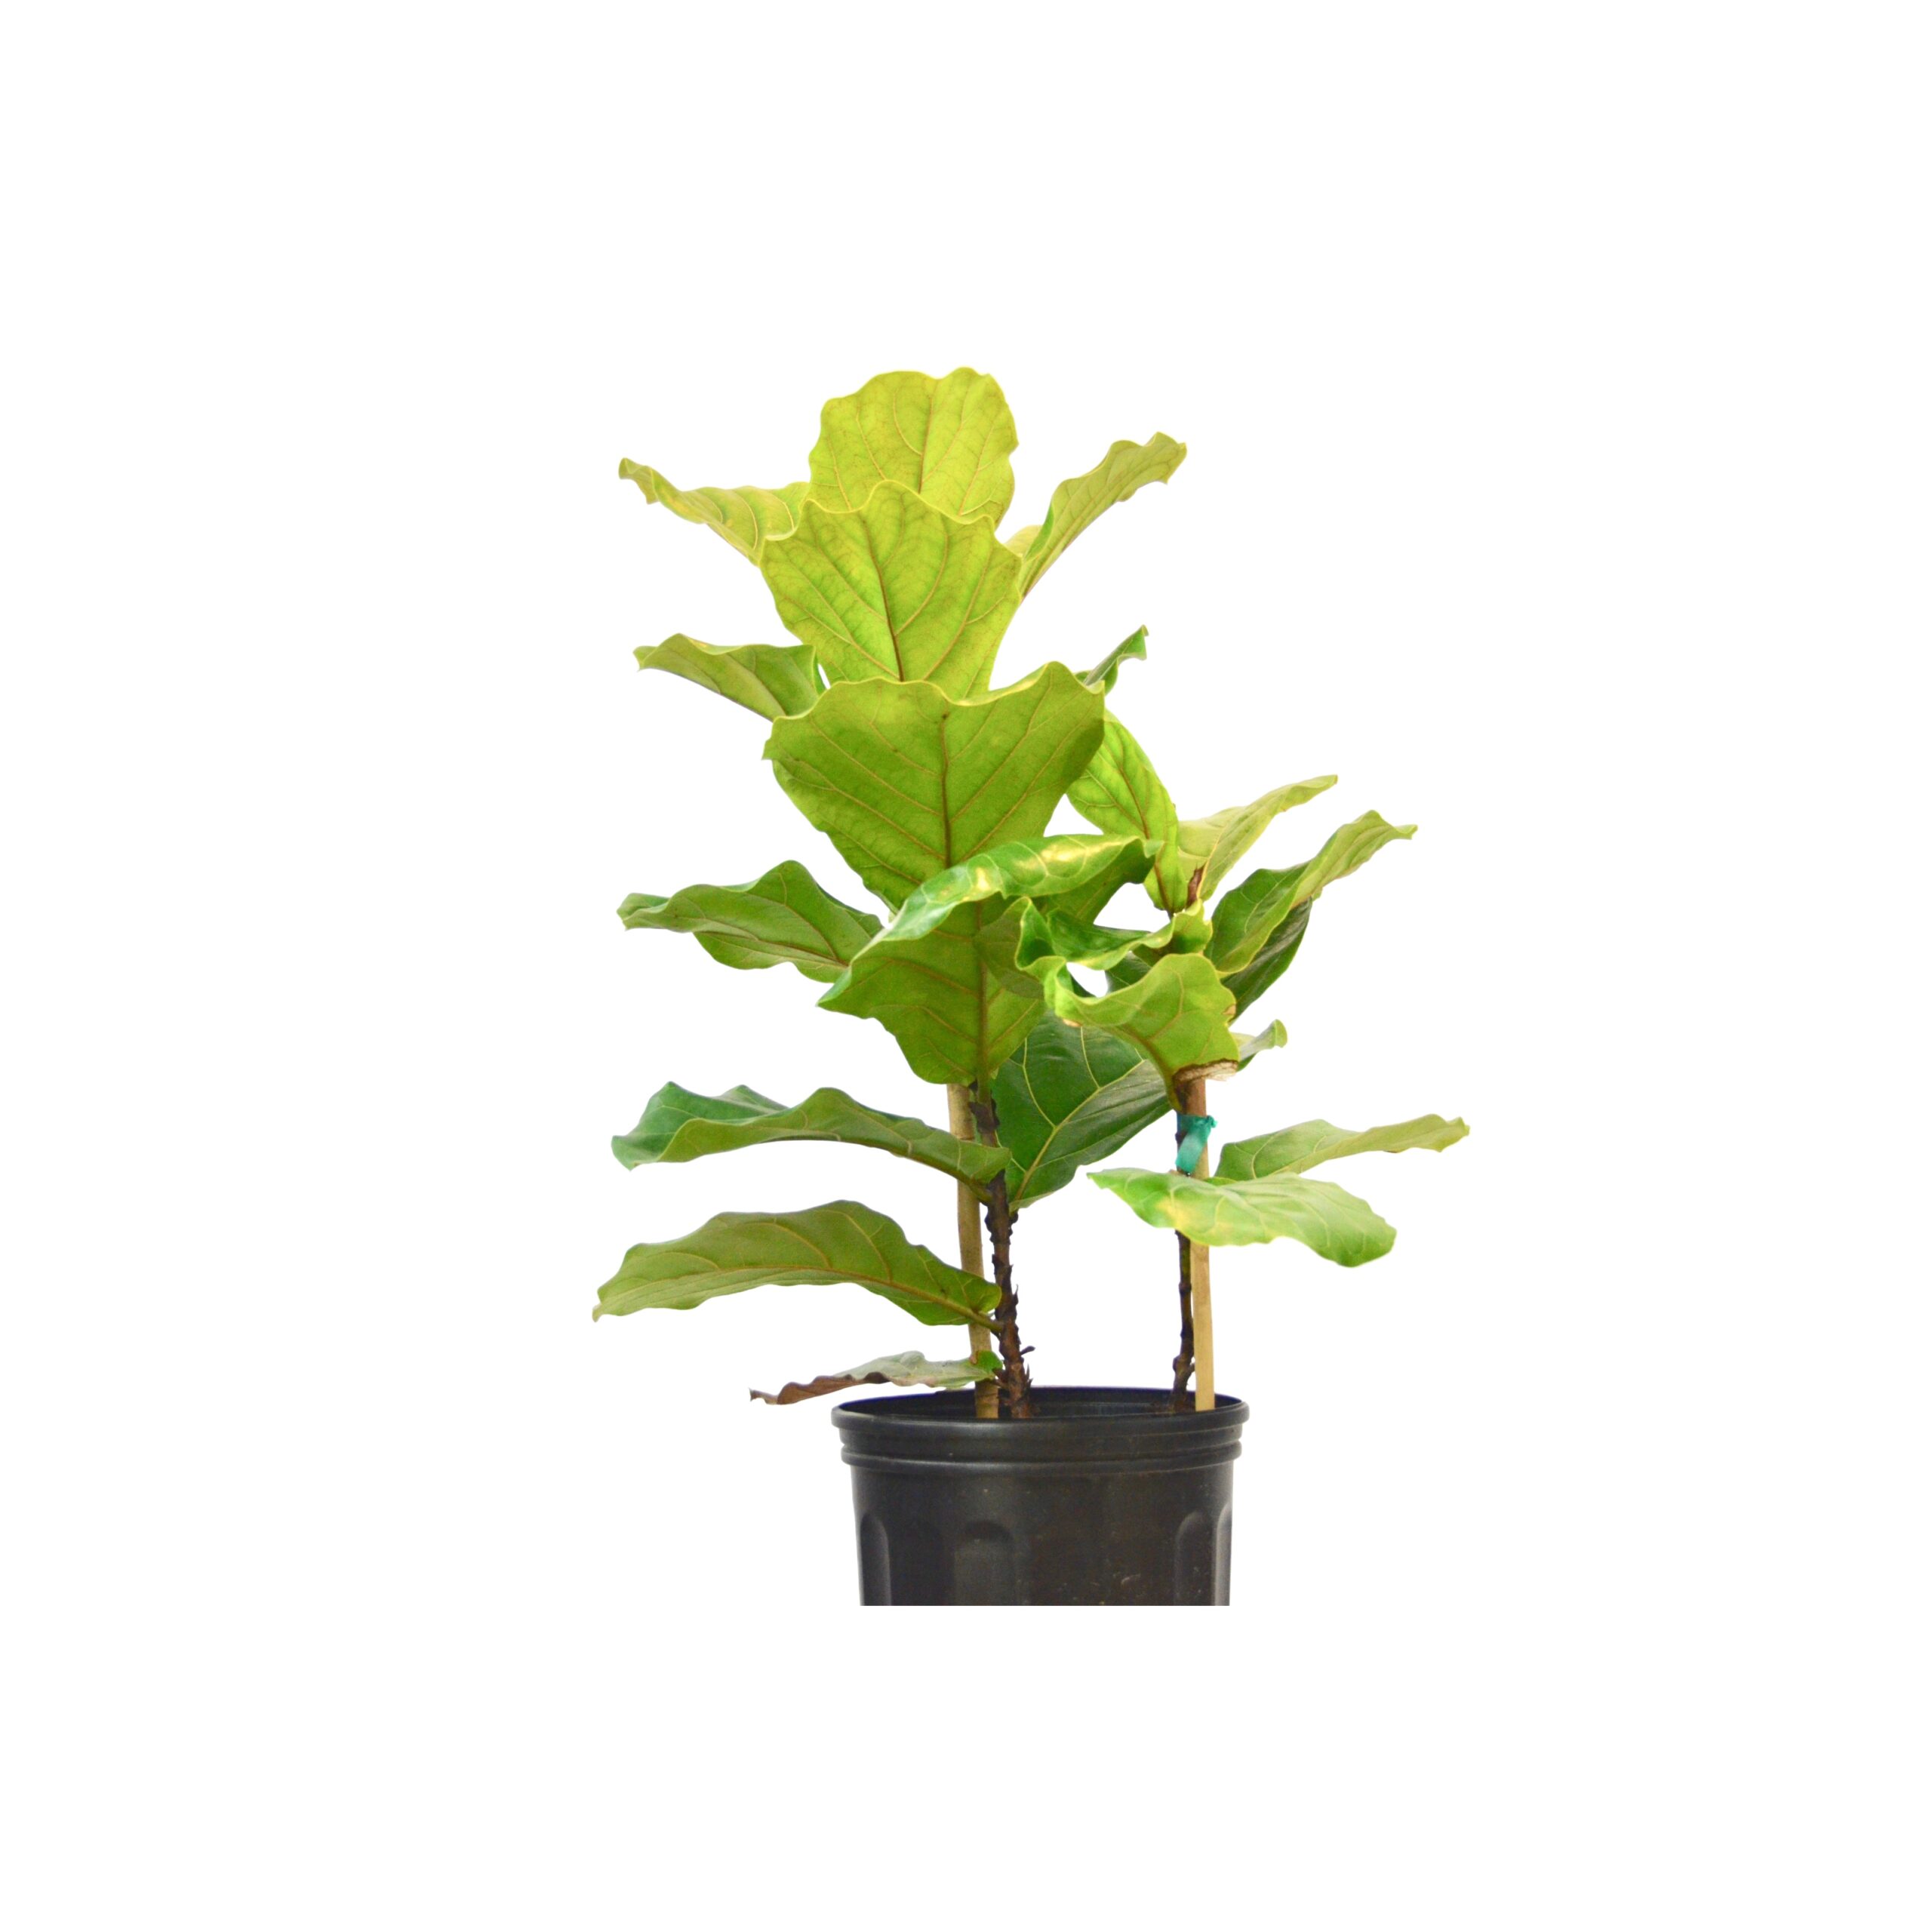 A fig tree in a black pot on a white background available at the best plant nursery near me.